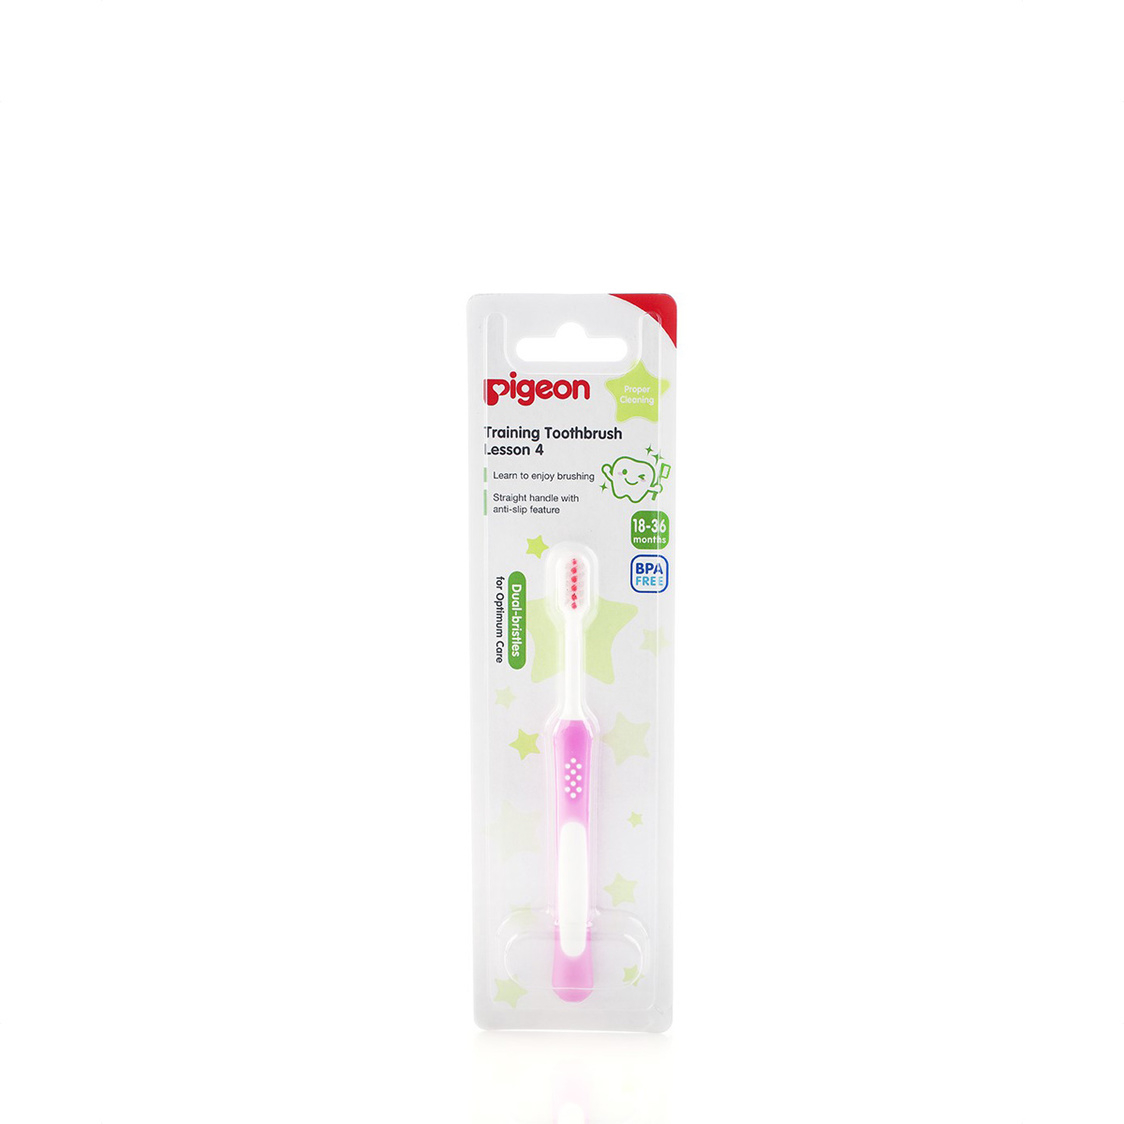 Pigeon Training Toothbrush Lesson 4 Pink